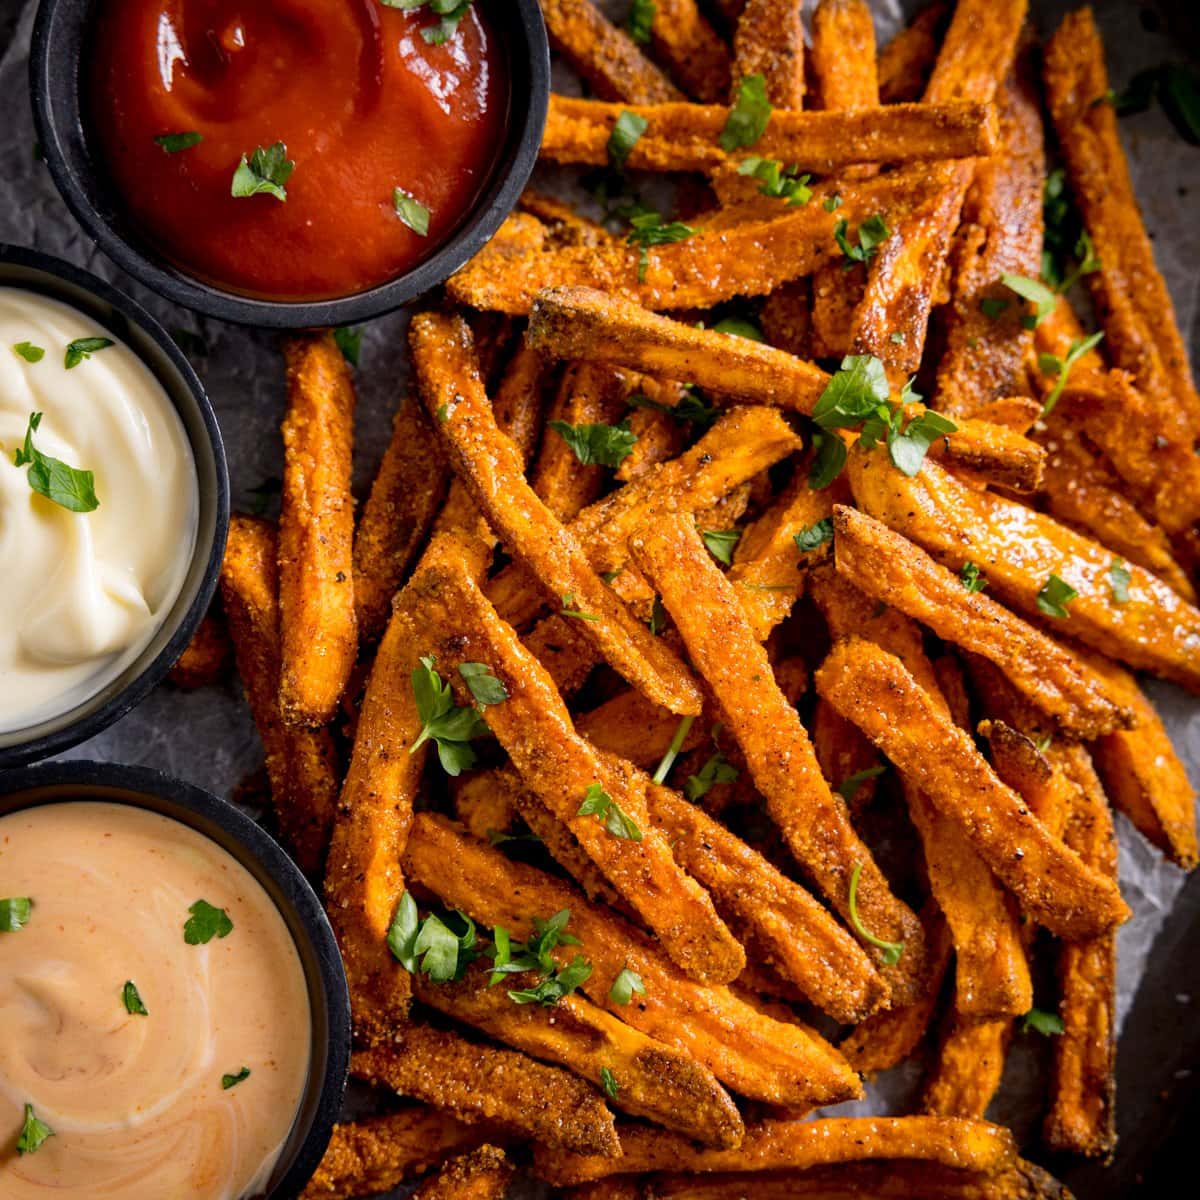 A tall image of cooked sweet potato fries, with three colourful dips alongside.